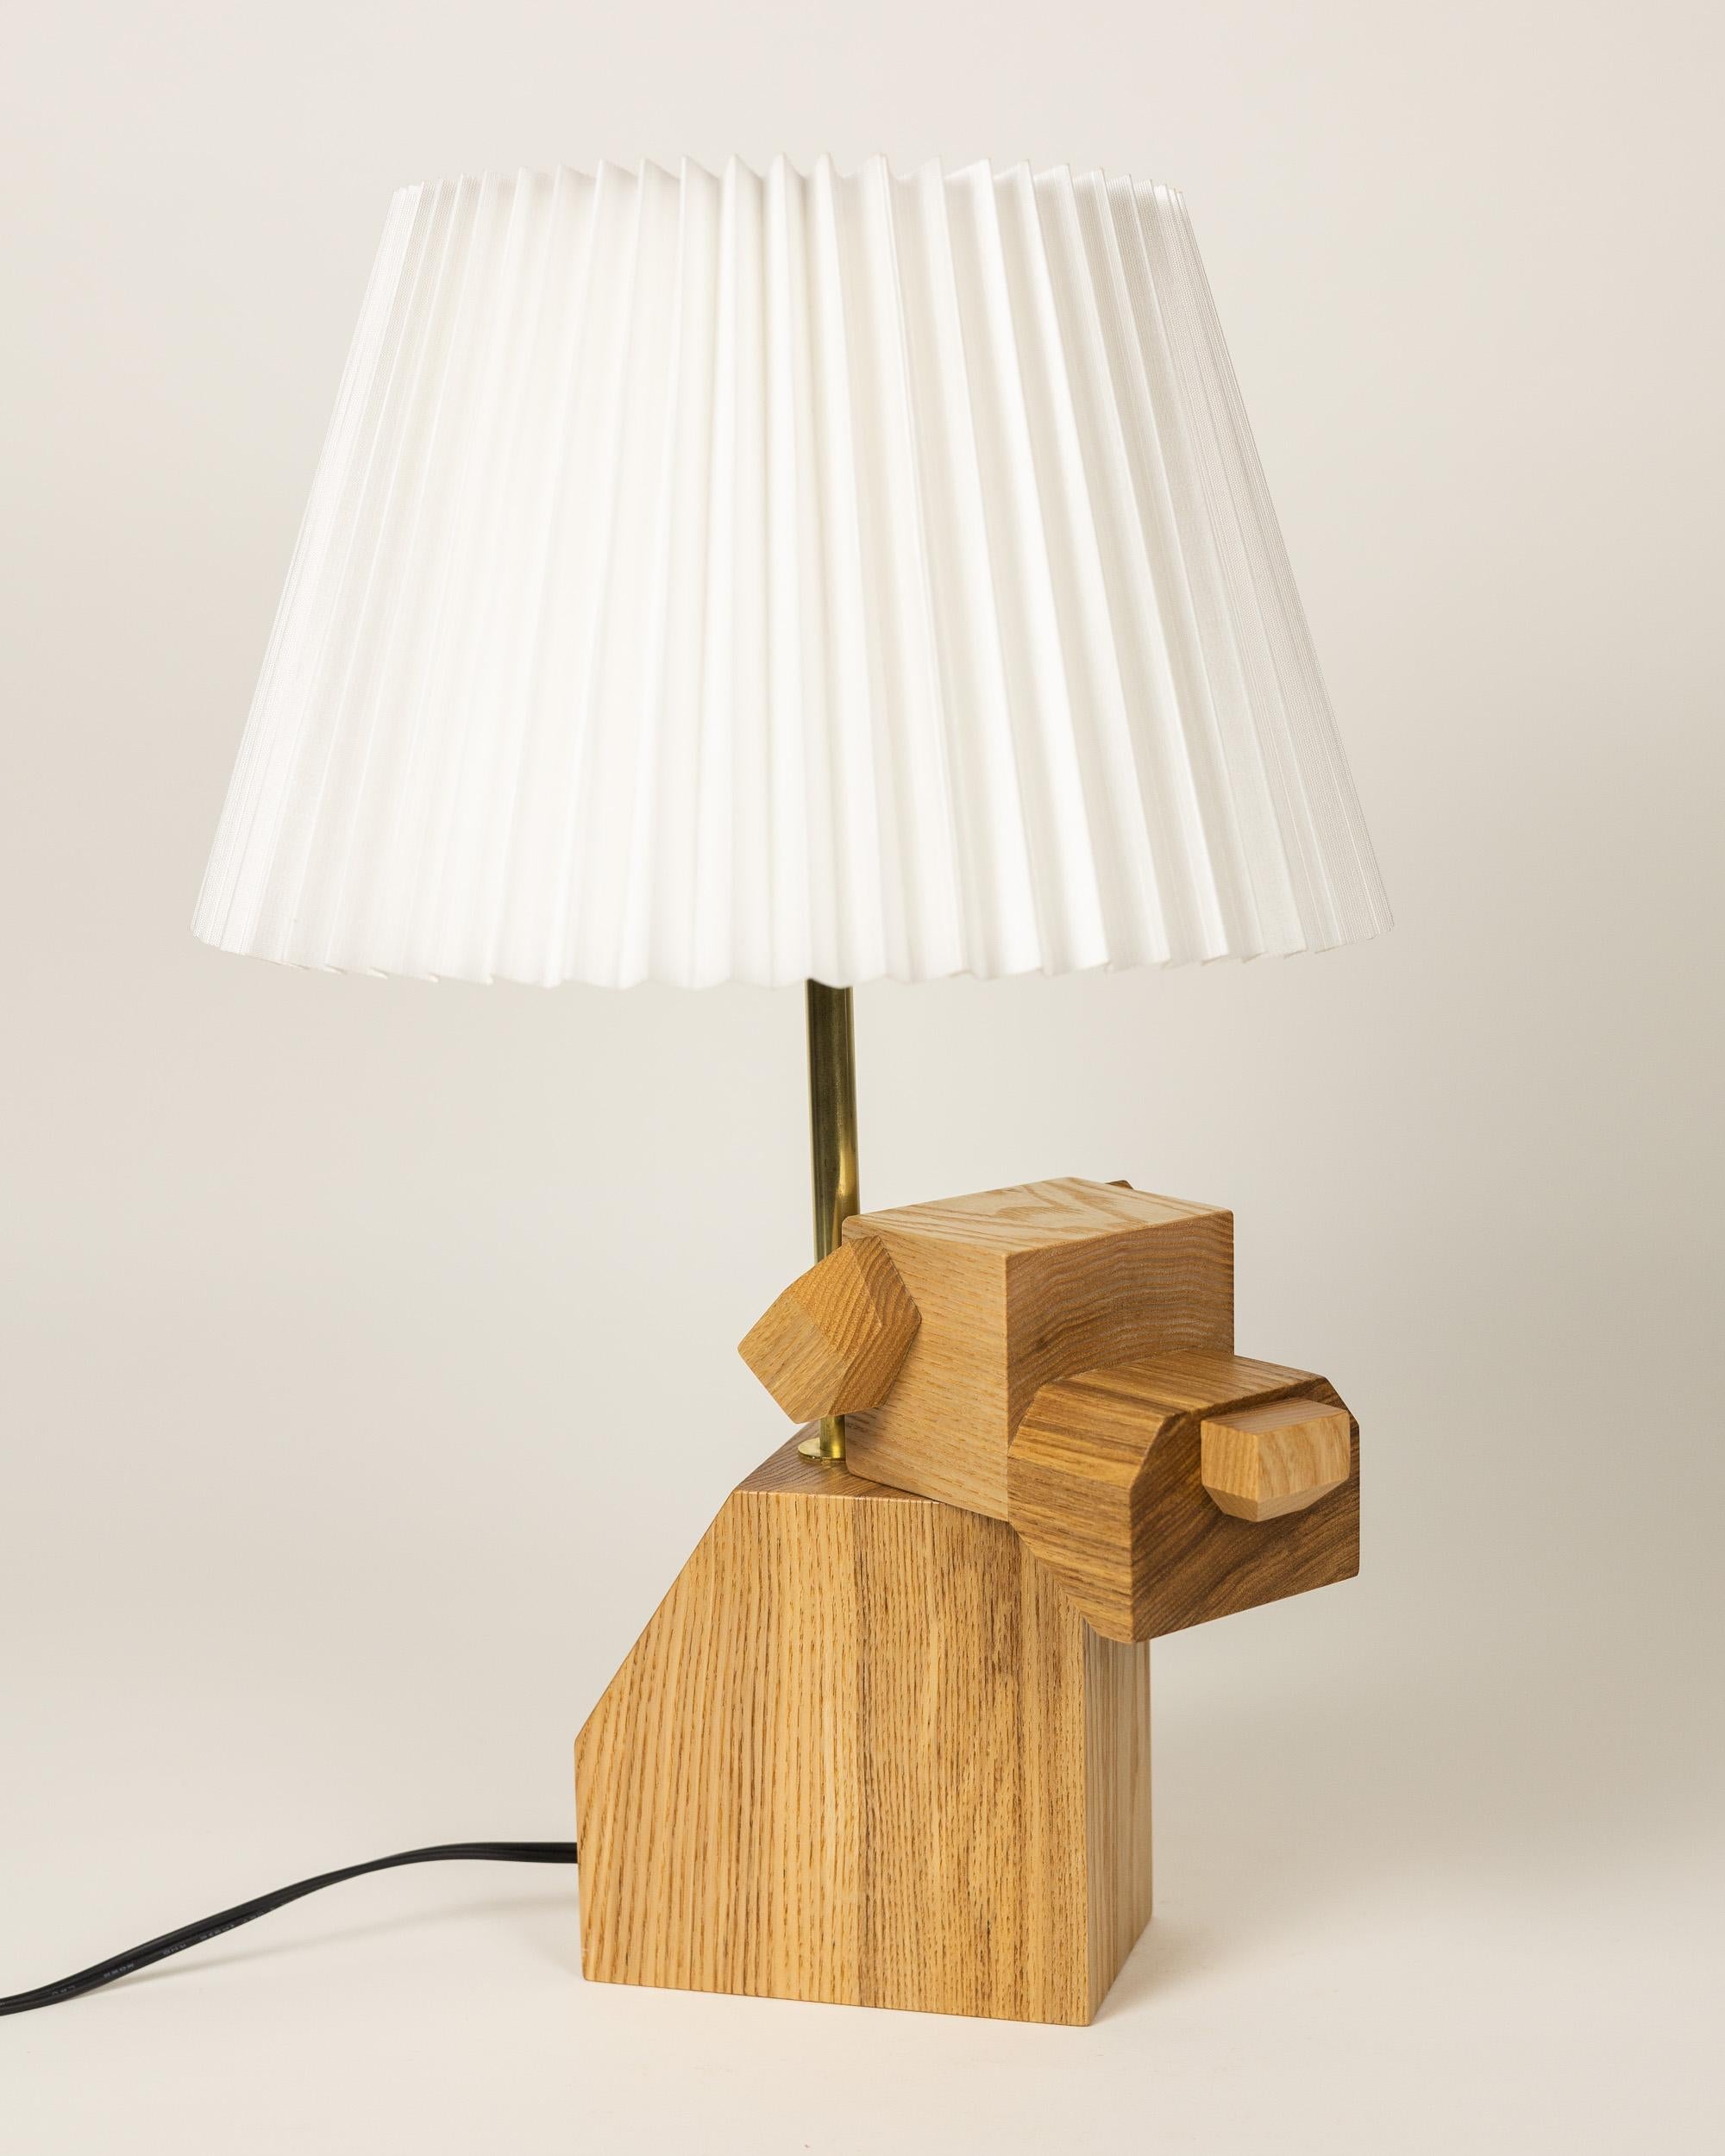 Japanese Wood DOGGY Table Lamp with White Fabric Shade, hand-crafted, hardwood For Sale